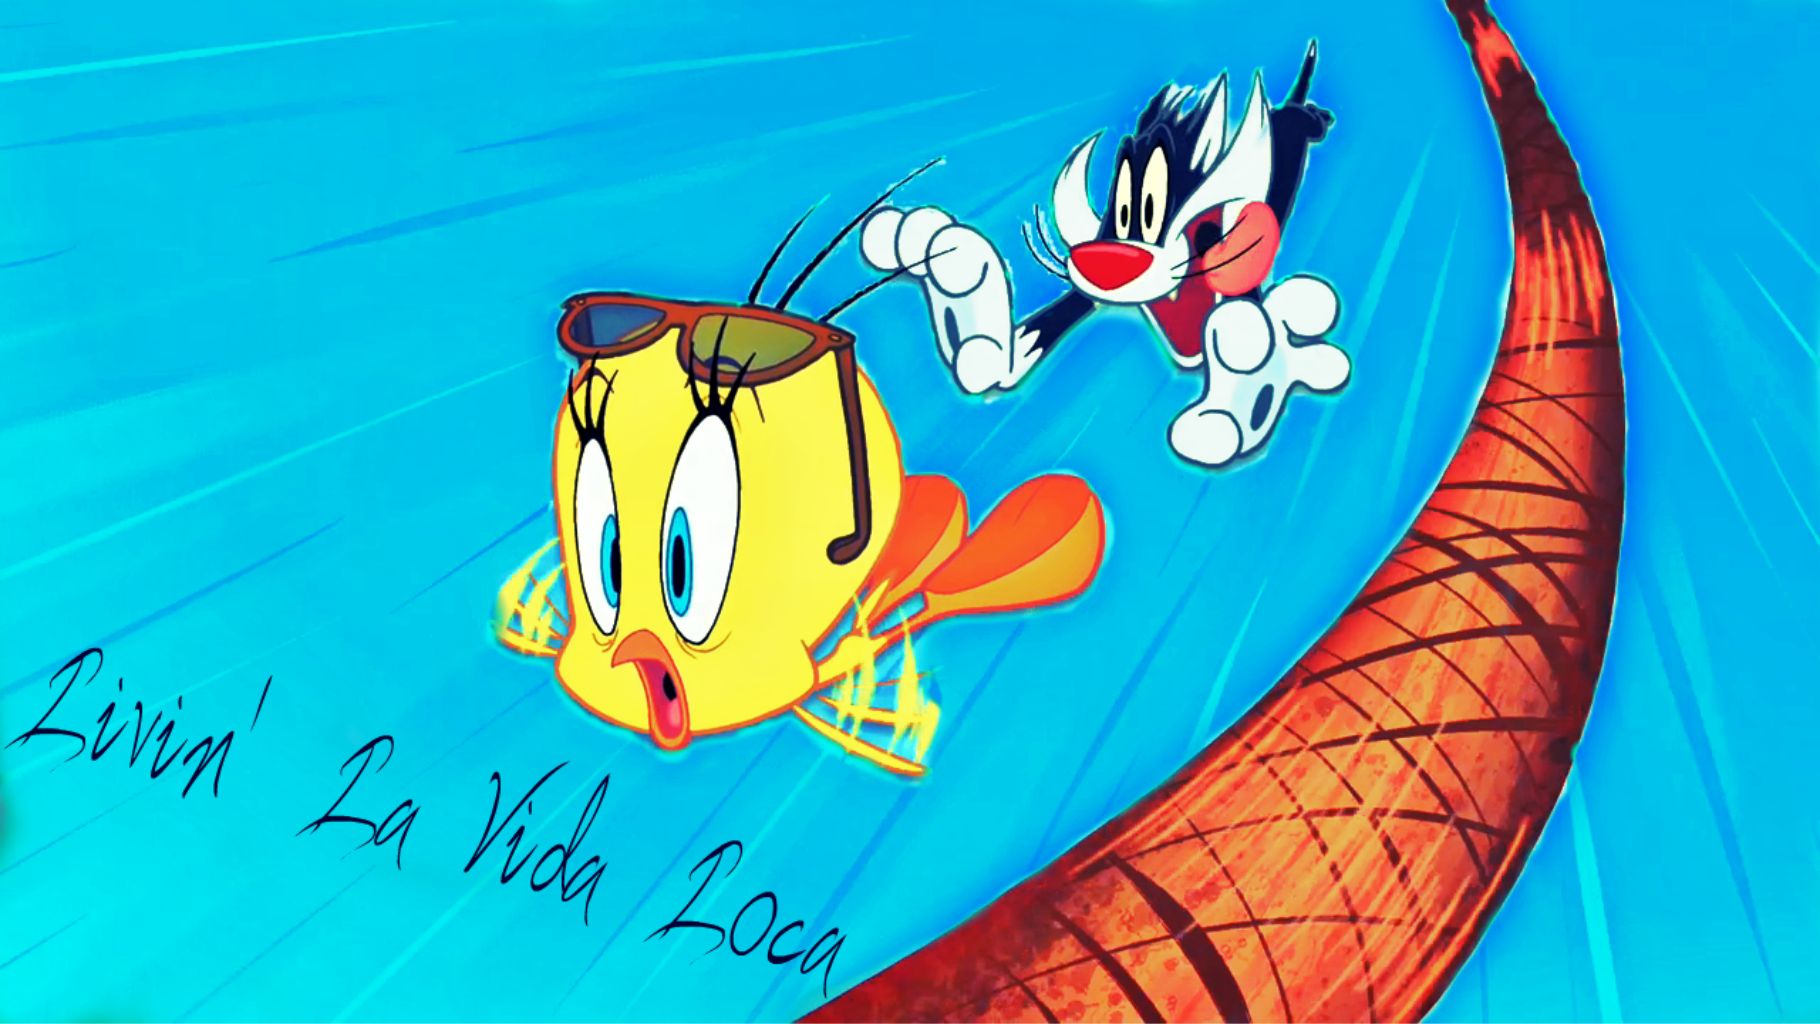 Free Download Tweety Looney Tunes Sylvester F Wallpaper 10x1024 10x1024 For Your Desktop Mobile Tablet Explore 42 Sylvester And Tweety Wallpaper Sylvester And Tweety Wallpaper Tweety Desktop Wallpaper Tweety Wallpaper